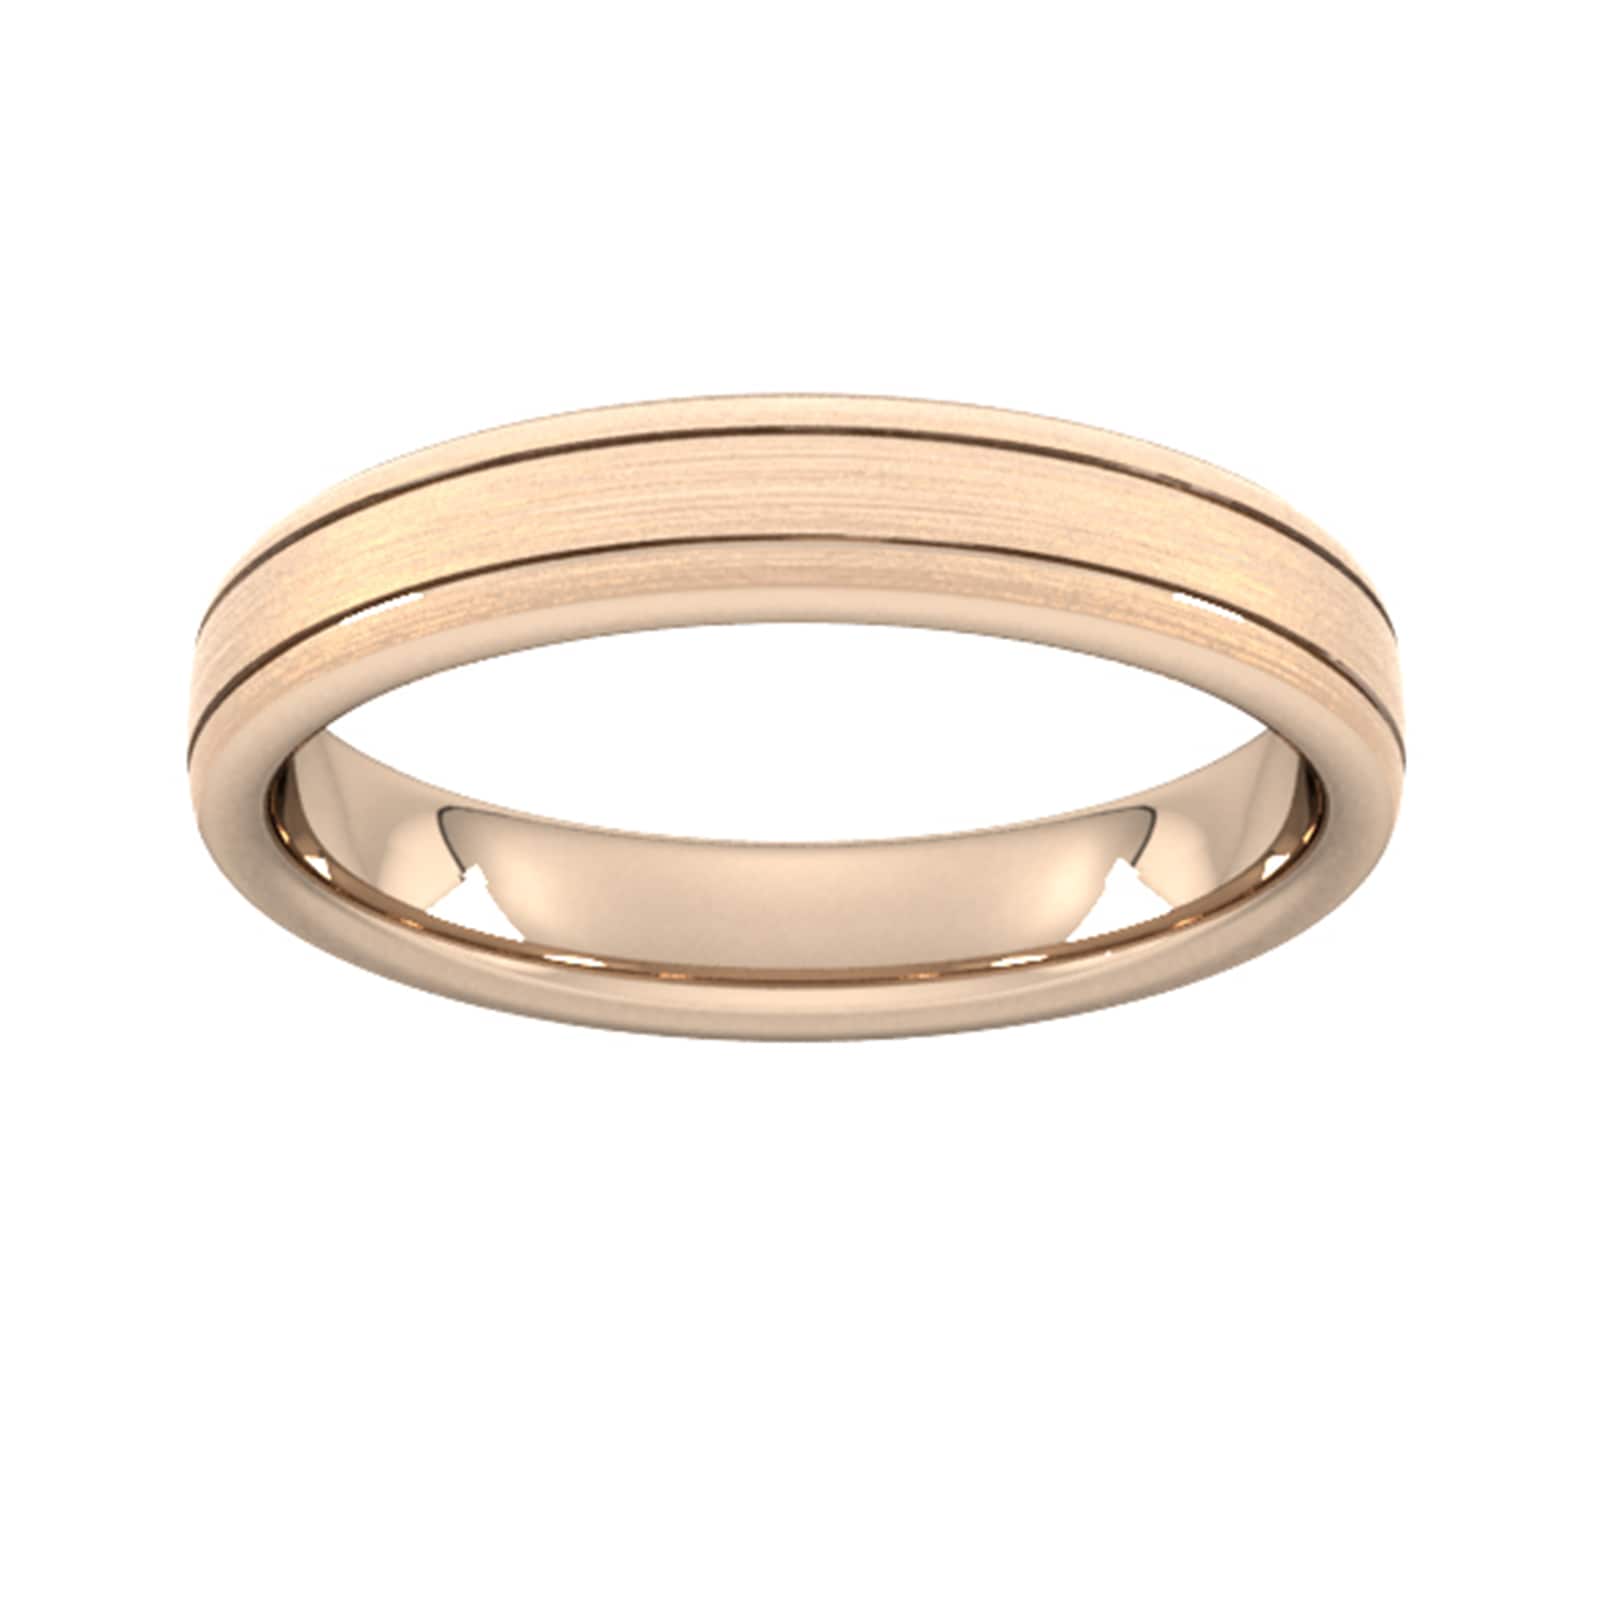 4mm D Shape Heavy Matt Finish With Double Grooves Wedding Ring In 9 Carat Rose Gold - Ring Size Q